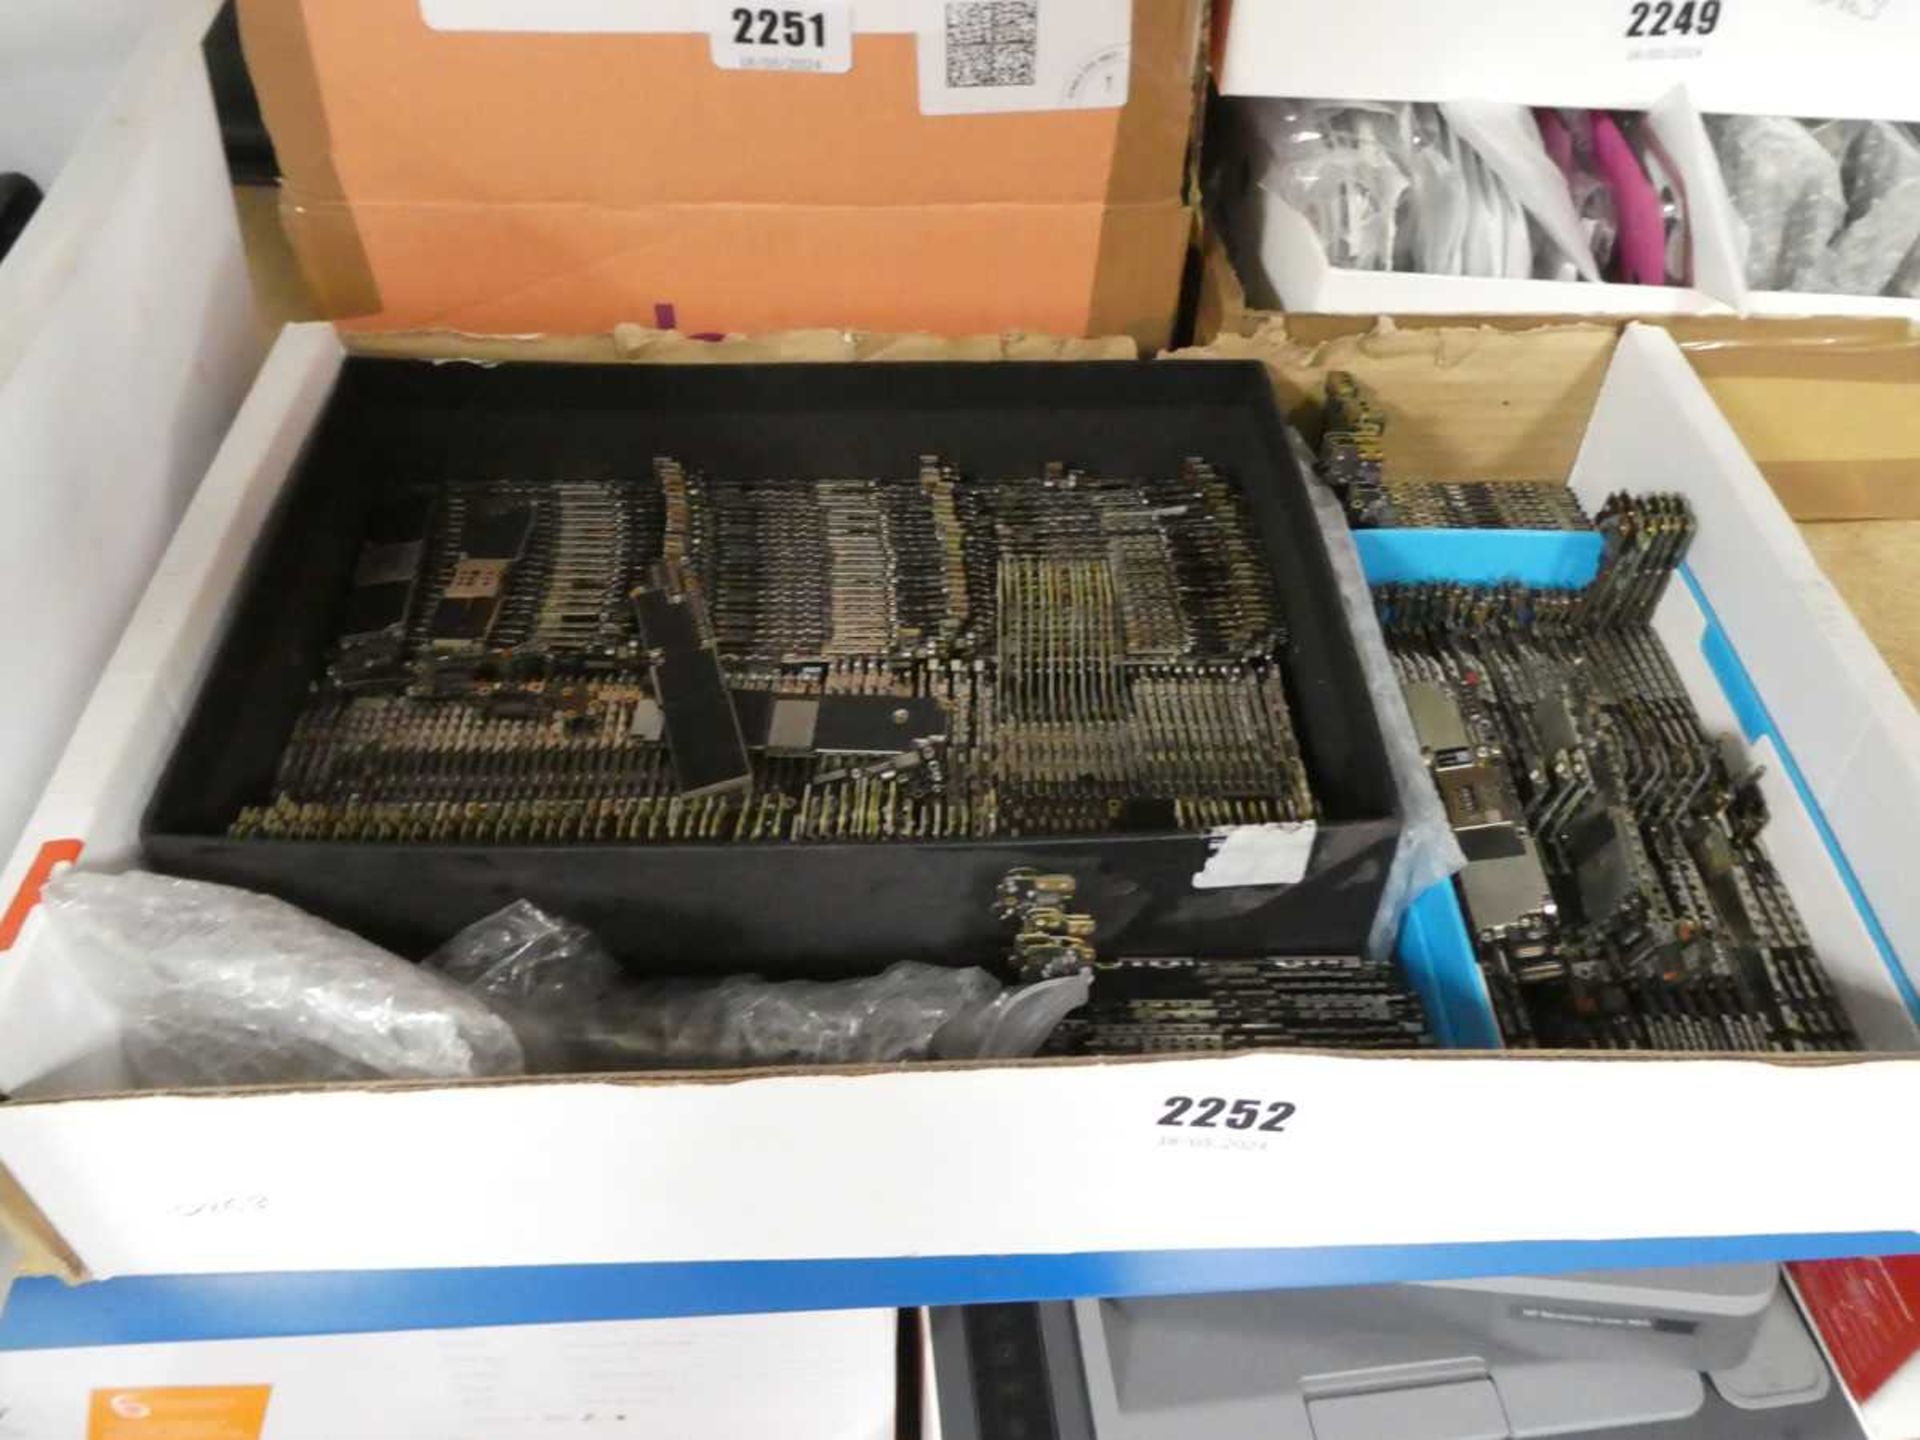 Box containing mobile phone motherboards